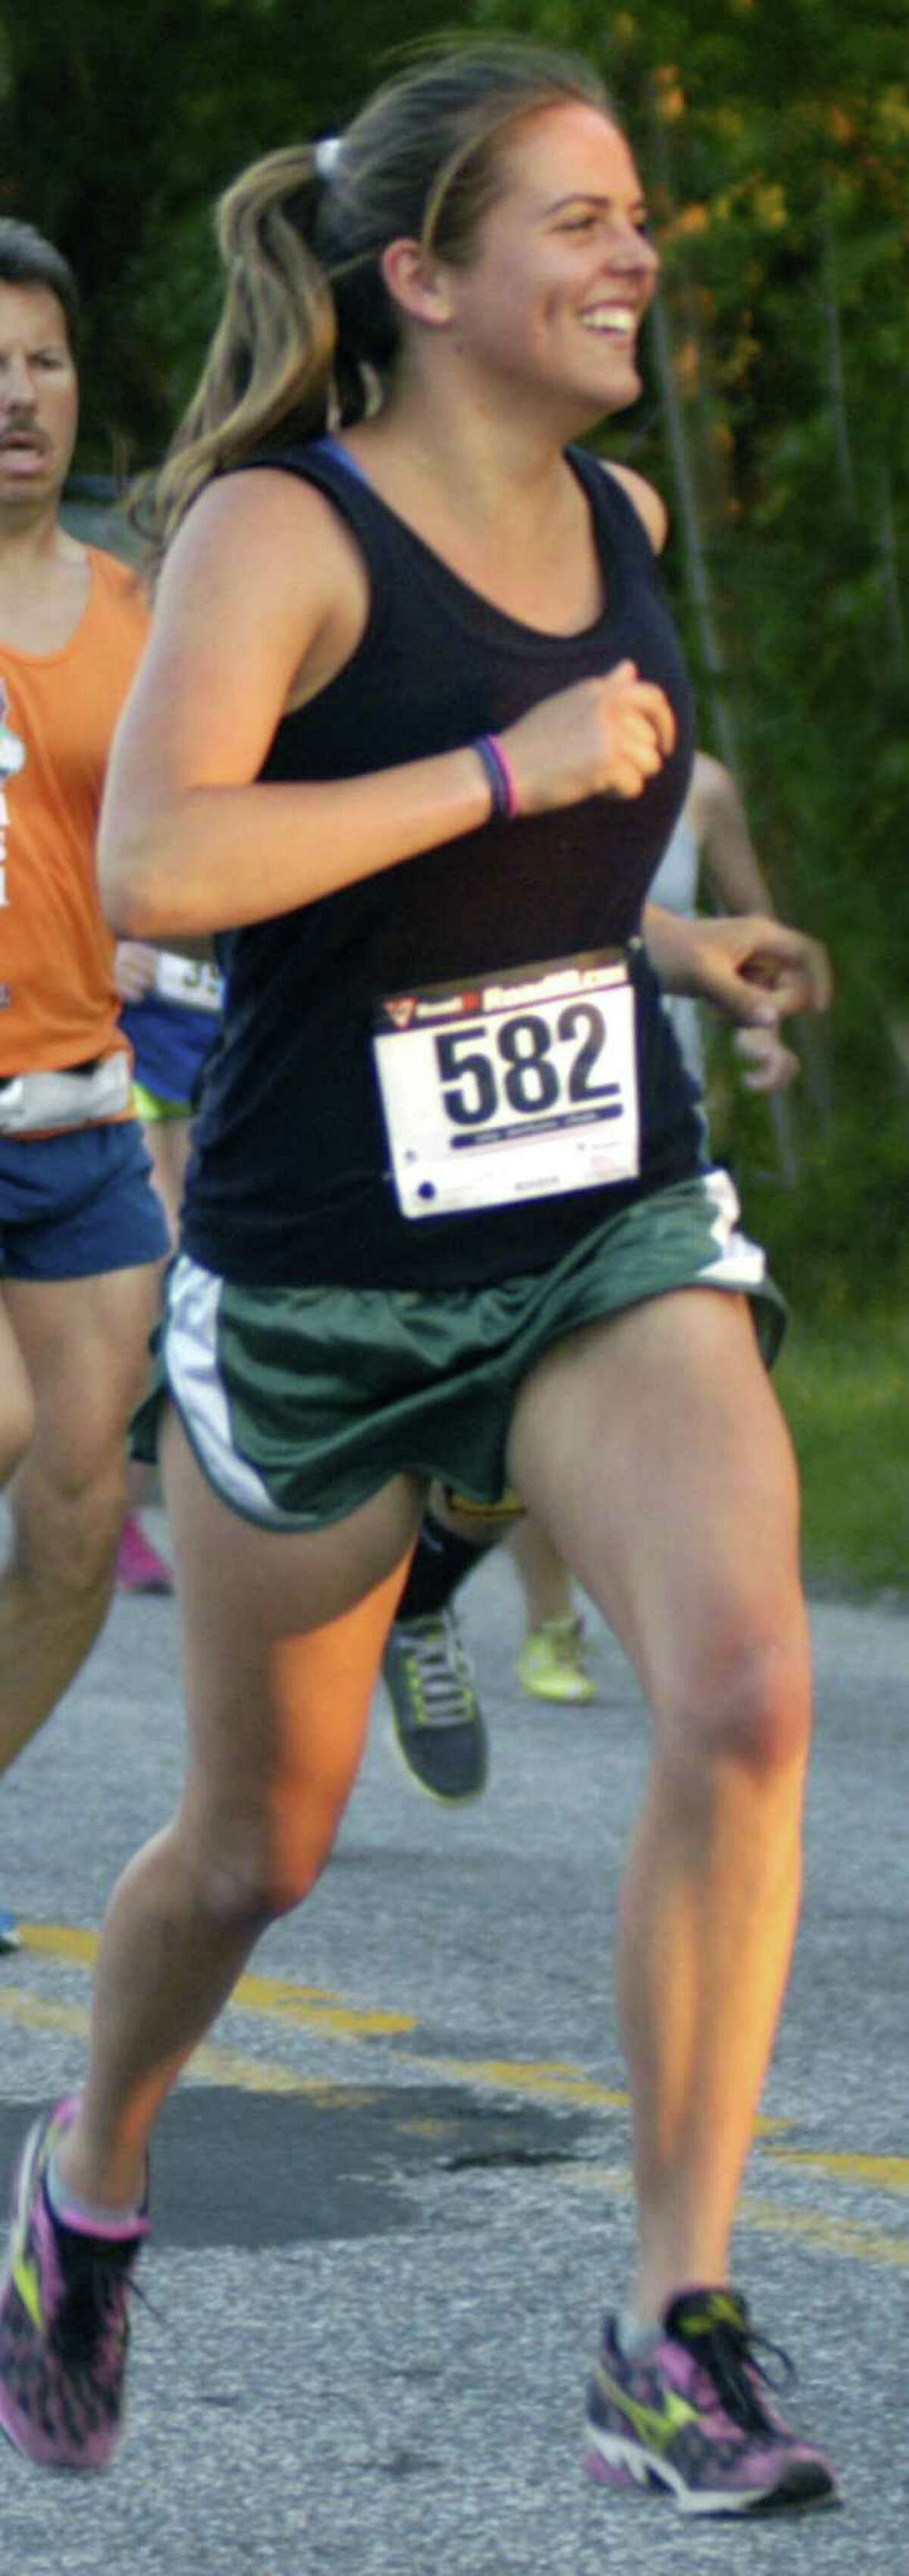 Stephanie Tyler, a 2009 graduate of New Milford High, sports a smile en route to second place among women's competitors in the second annual Bank Street Theater Twilight Run 5K road race in New Milford. May 31, 2013